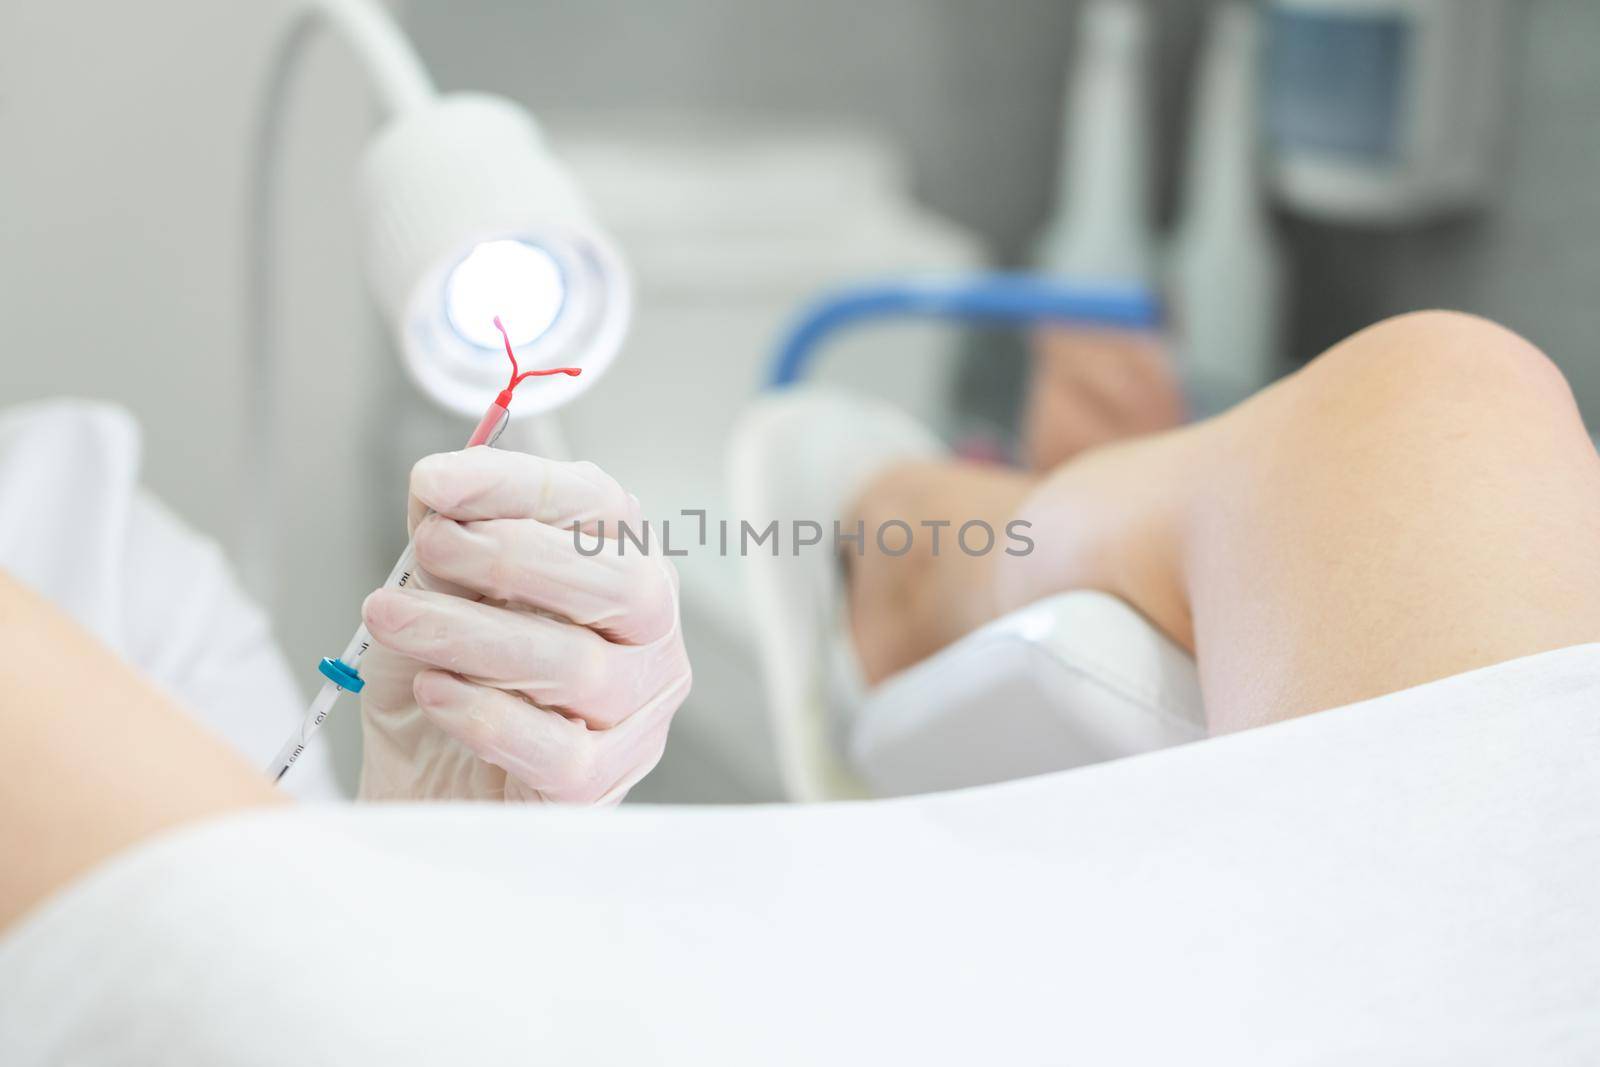 Gynecologist holding an IUD birth control device before using it for patient by Mariakray